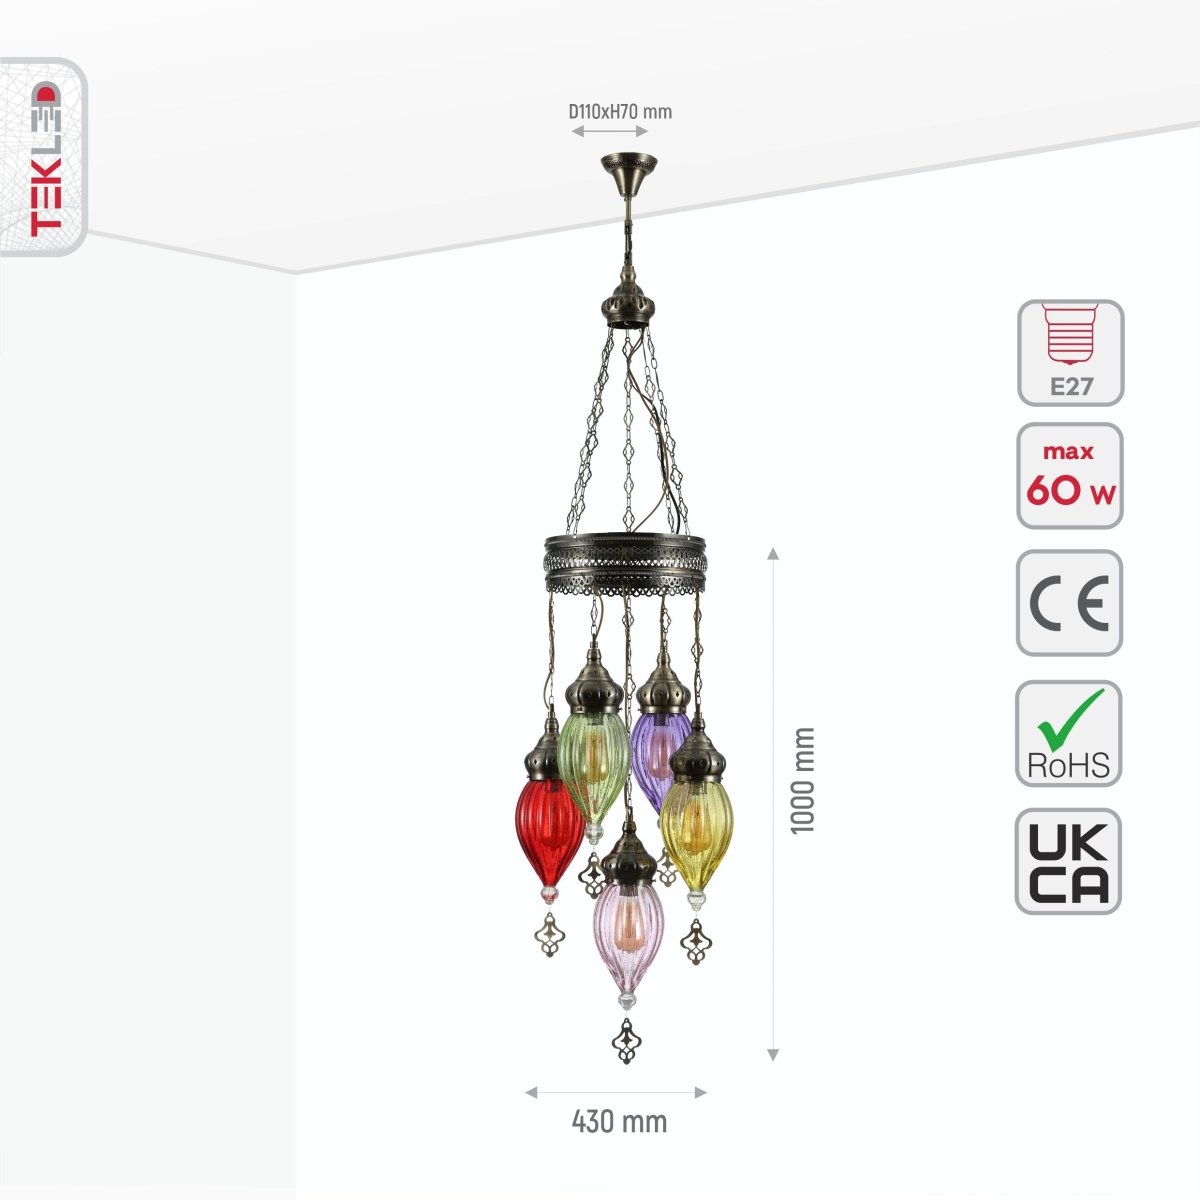 Size and specs of Moroccan Style Antique Brass and Multi Colour Glass Chandelier Pendant Light 5xE27 | TEKLED 158-19560